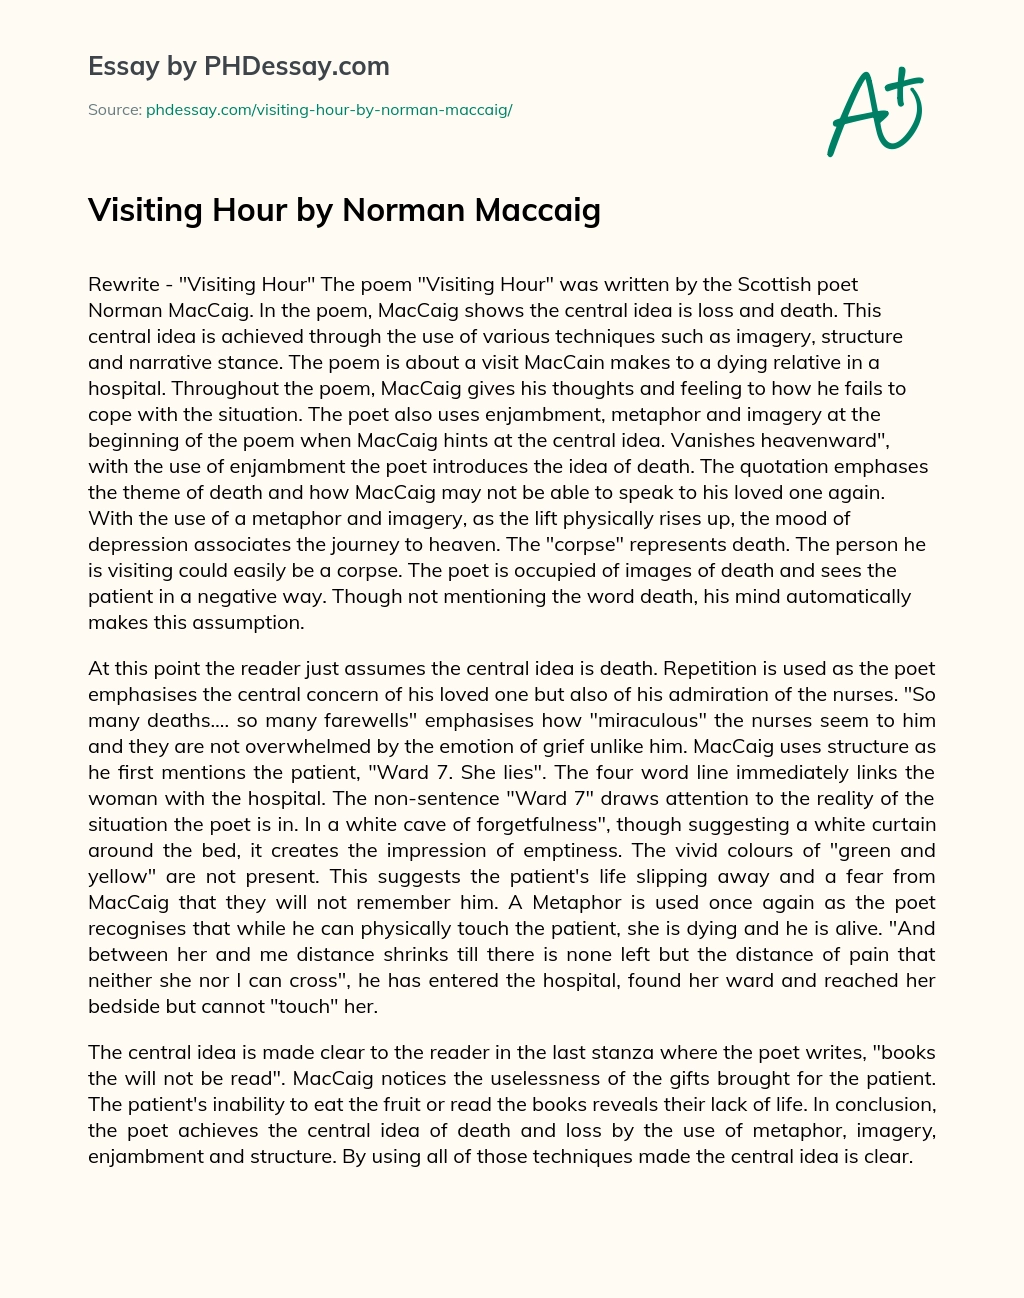 Visiting Hour by Norman Maccaig essay